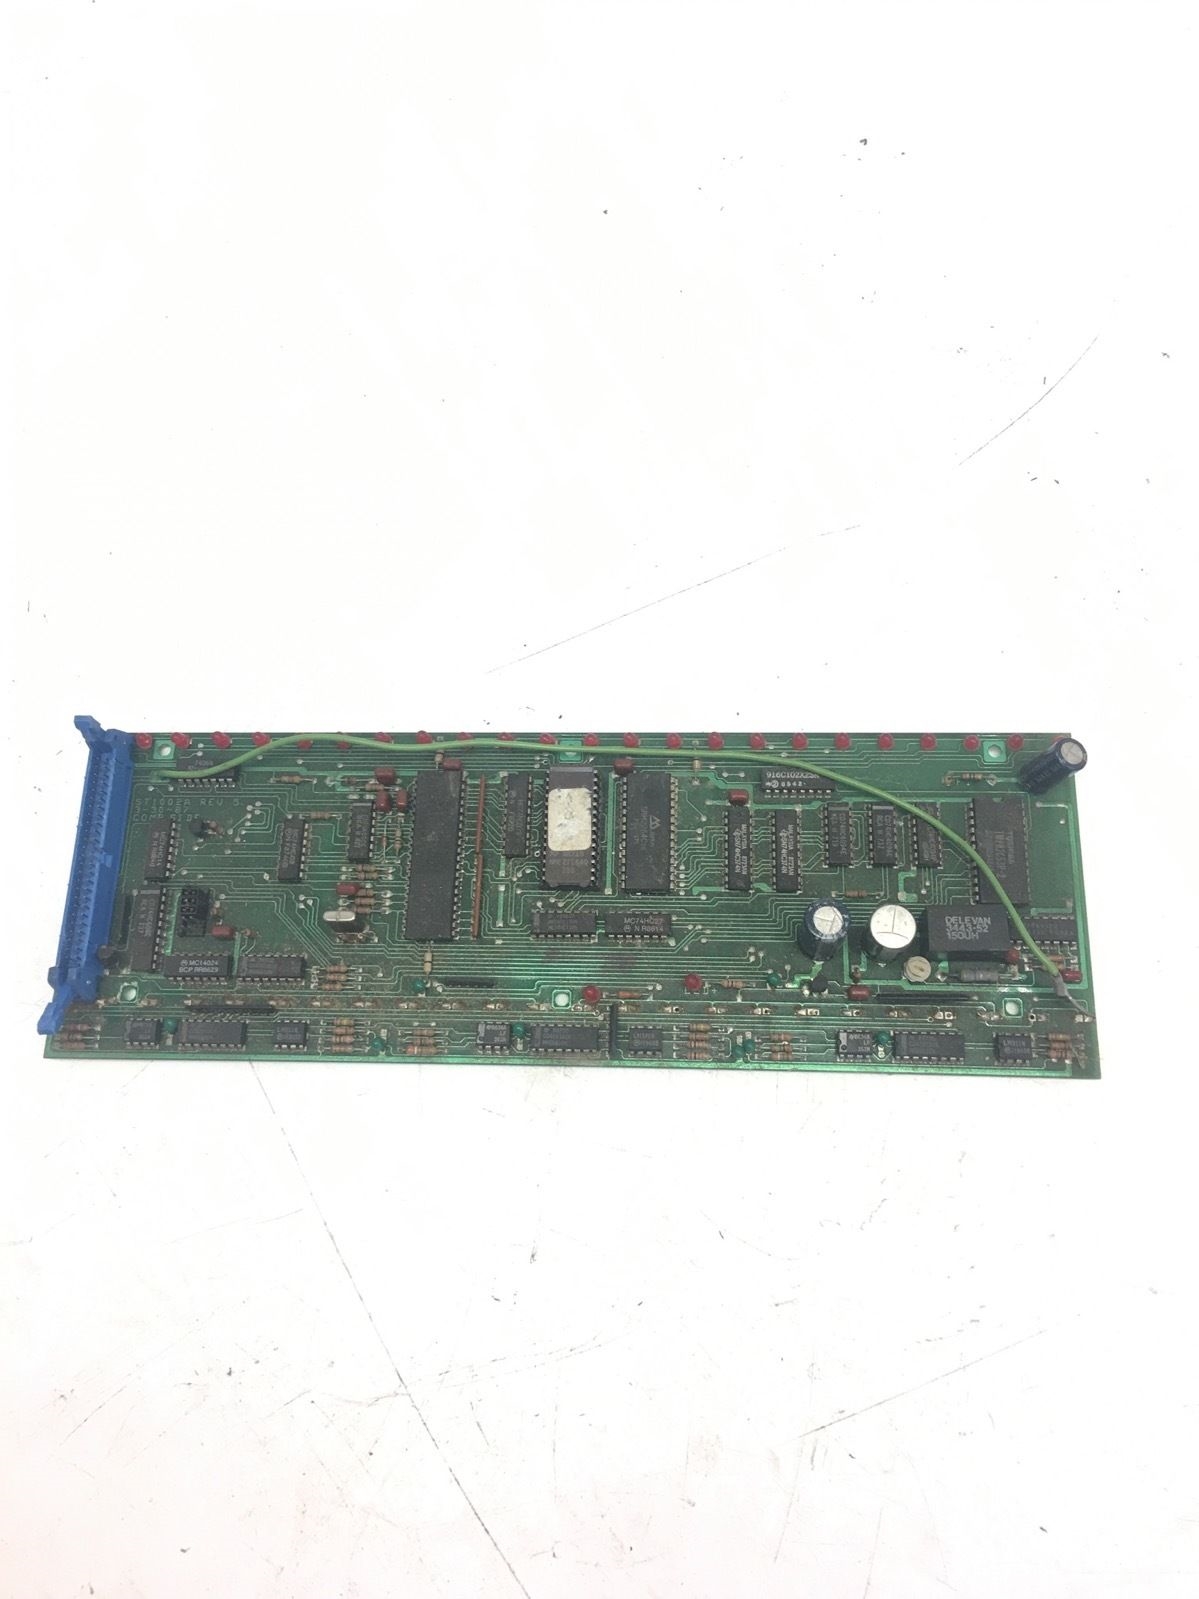 TEXAS INSTRUMENTS ST1002A REVISION 5 COMPONENT CIRCUIT PC CARD BOARD, (B273) 1